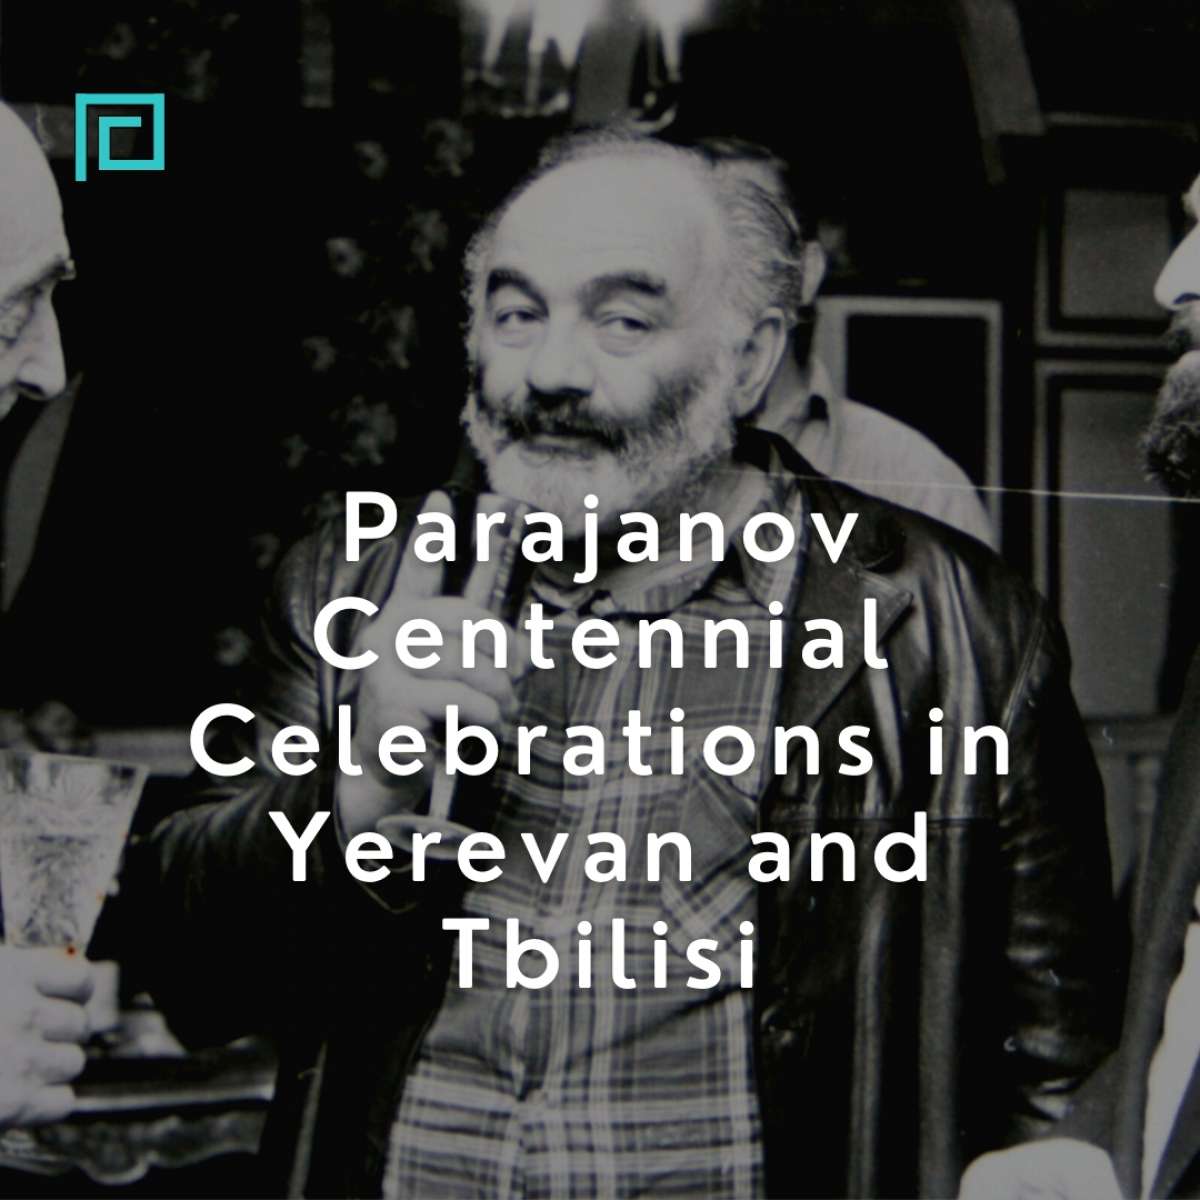 Parajanov Centennial Celebrations in Yerevan and Tbilisi